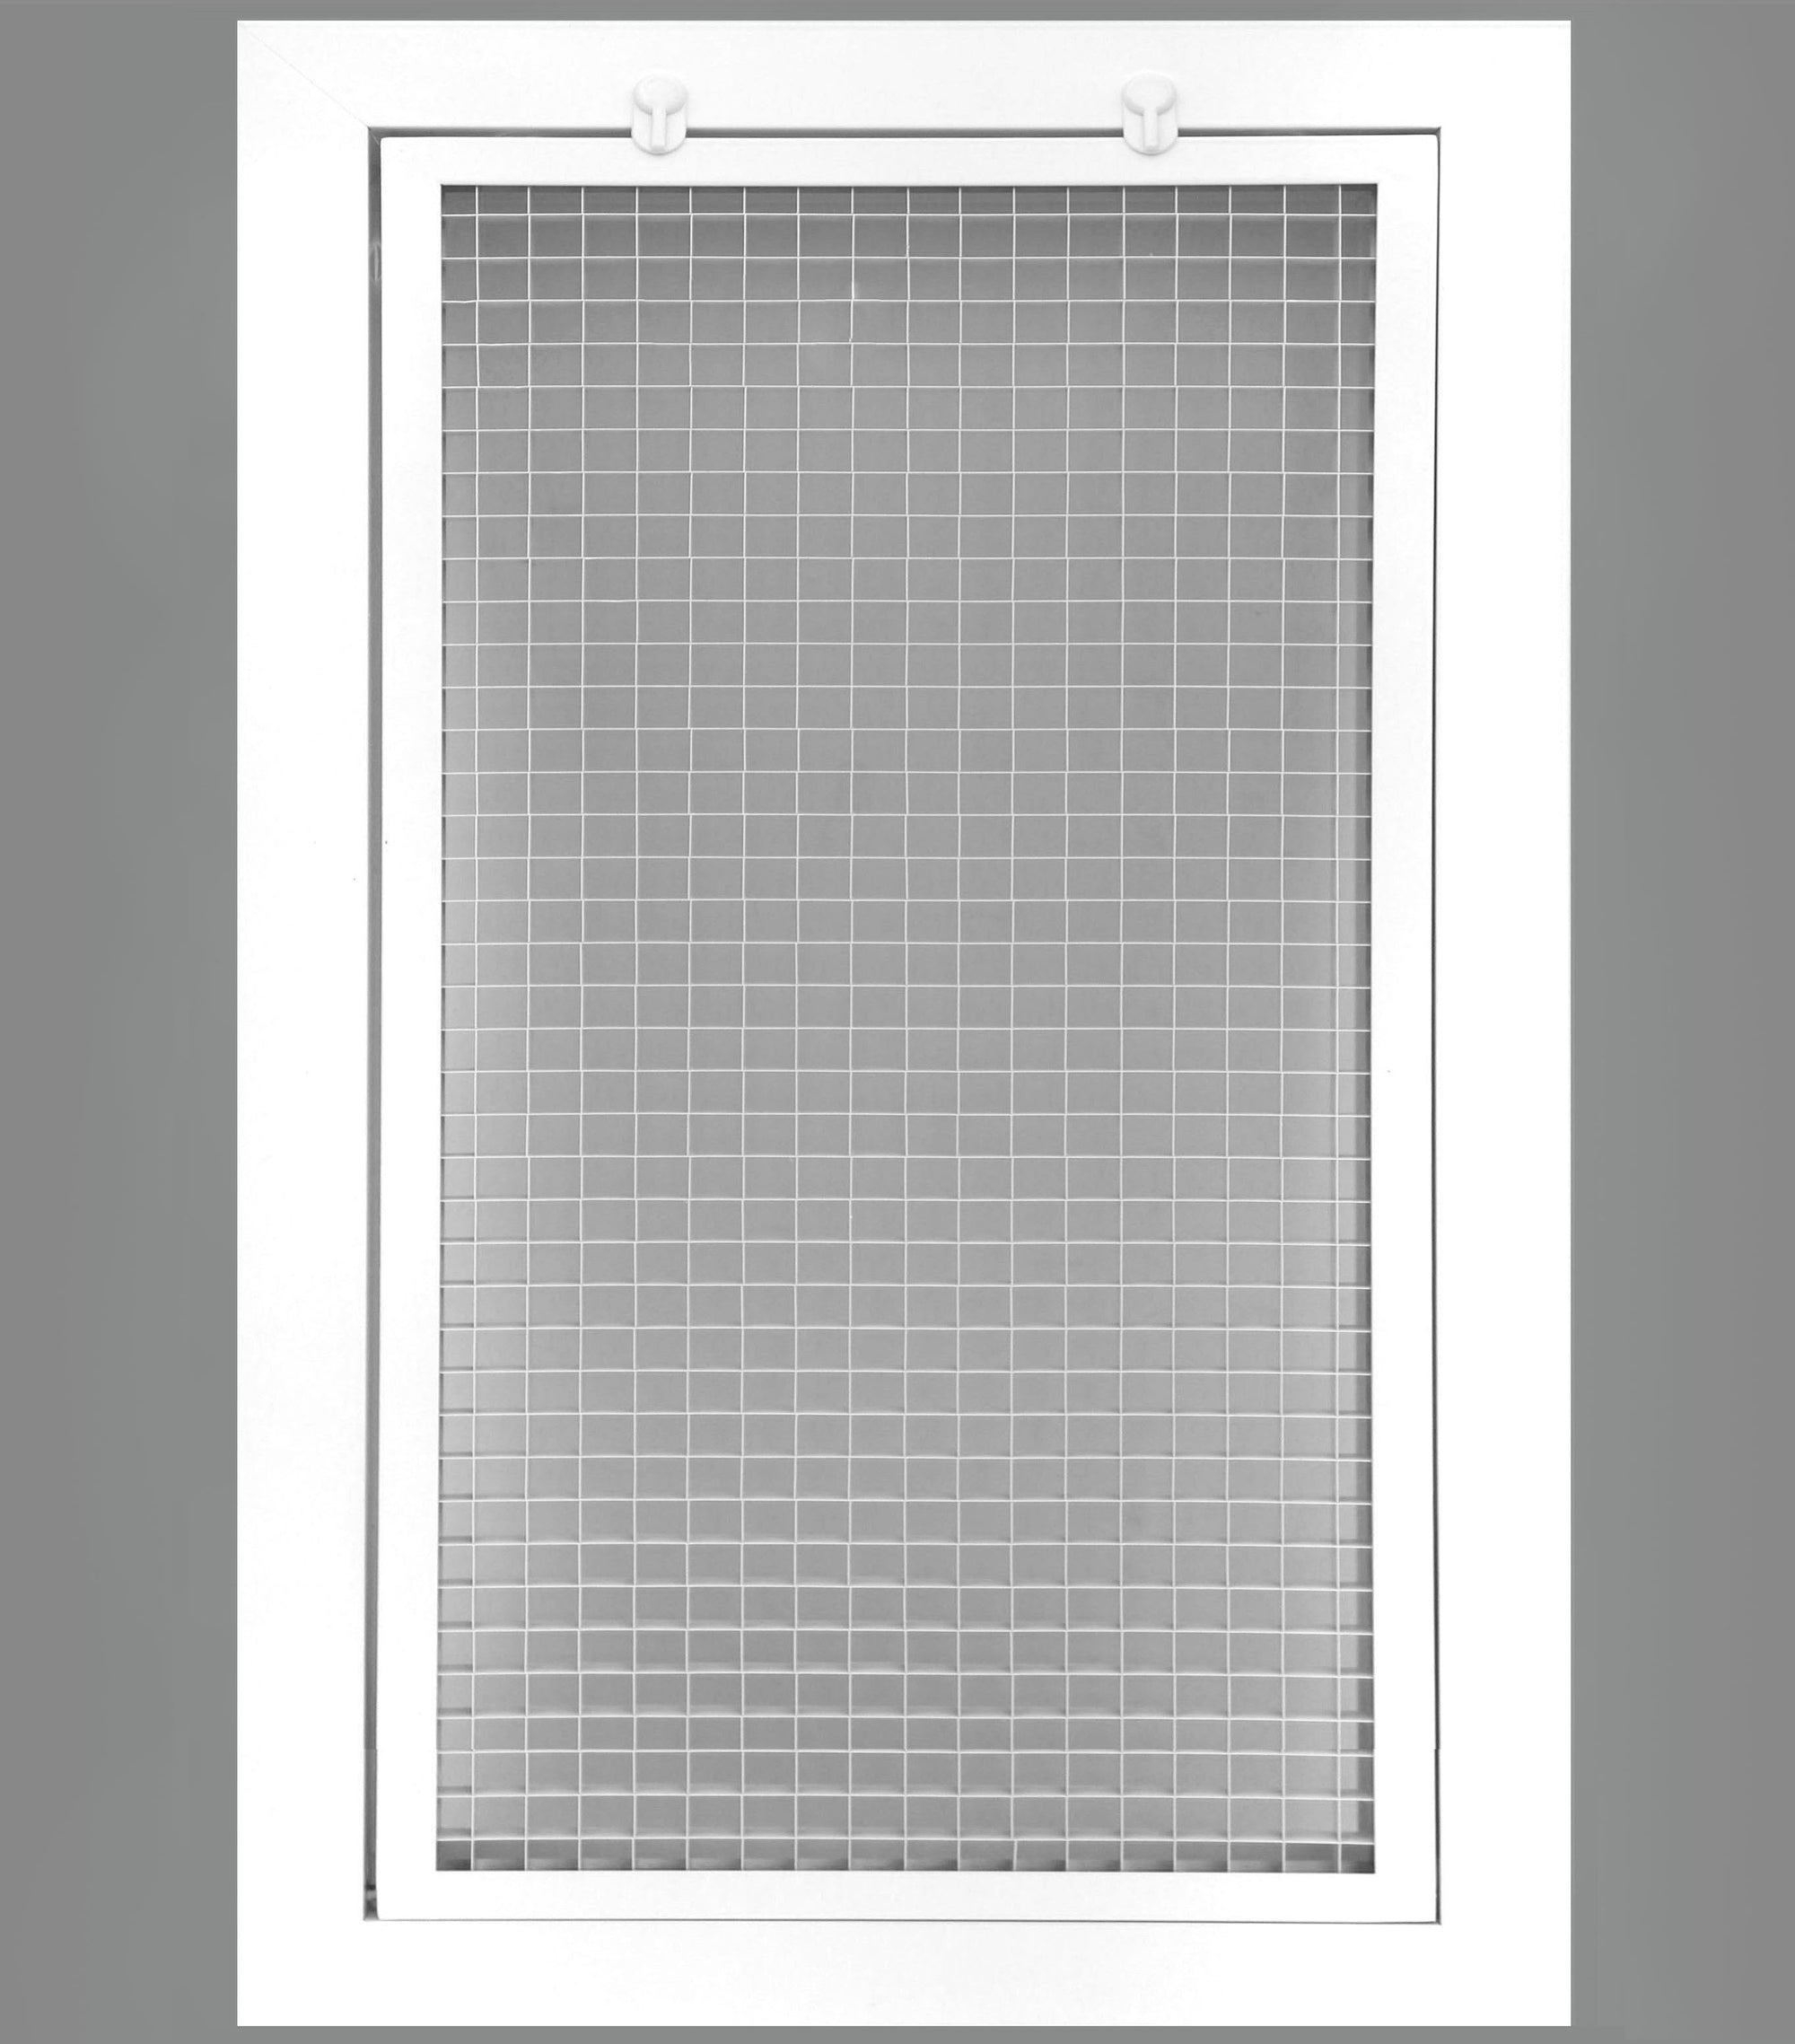 10" x 16" Cube Core Eggcrate Return Air Filter Grille for 1" Filter